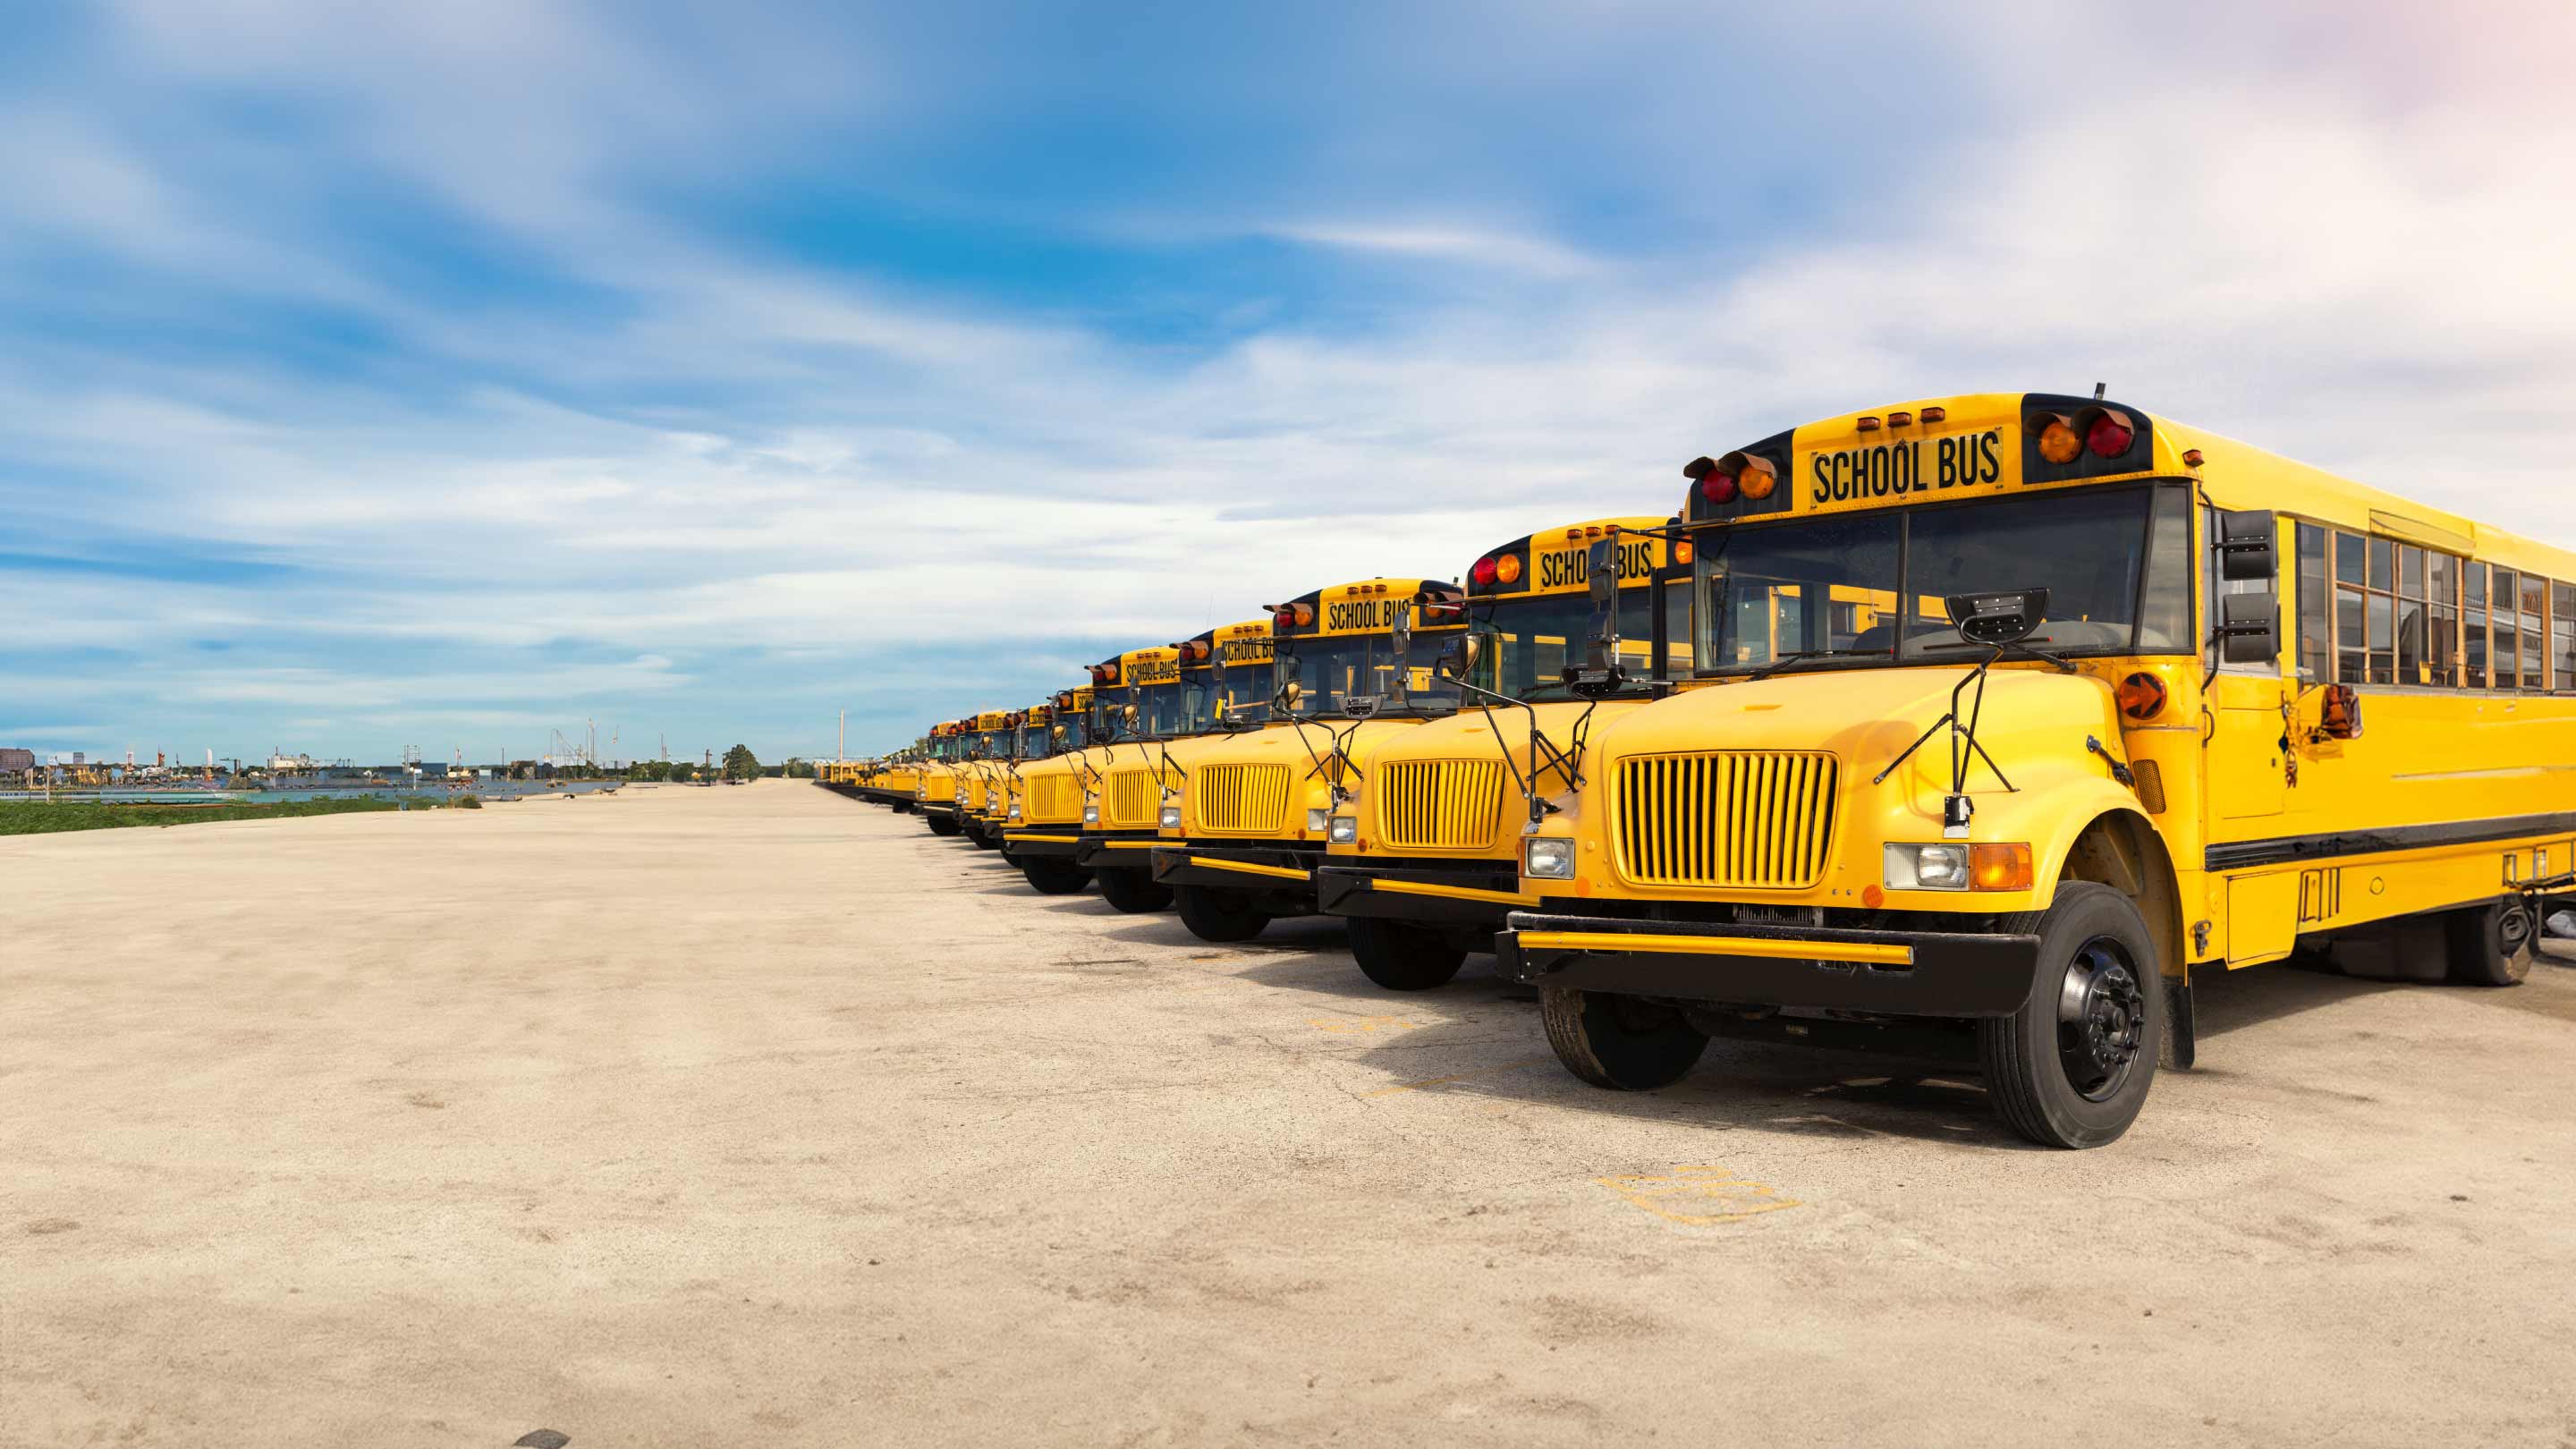 row of school busses parked